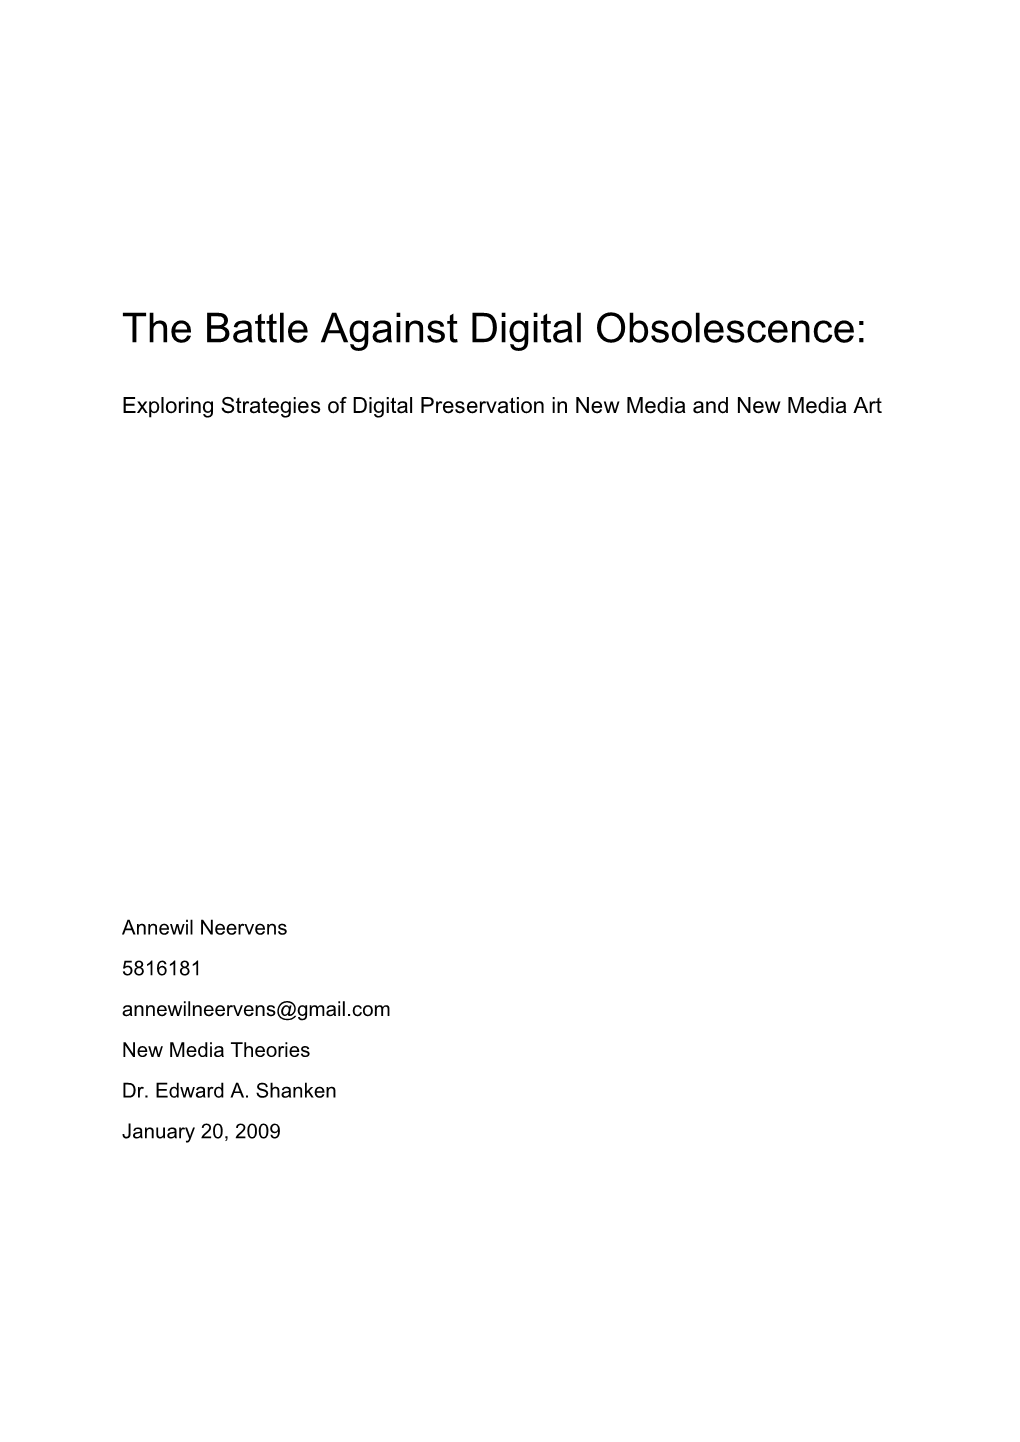 The Battle Against Digital Obsolescence